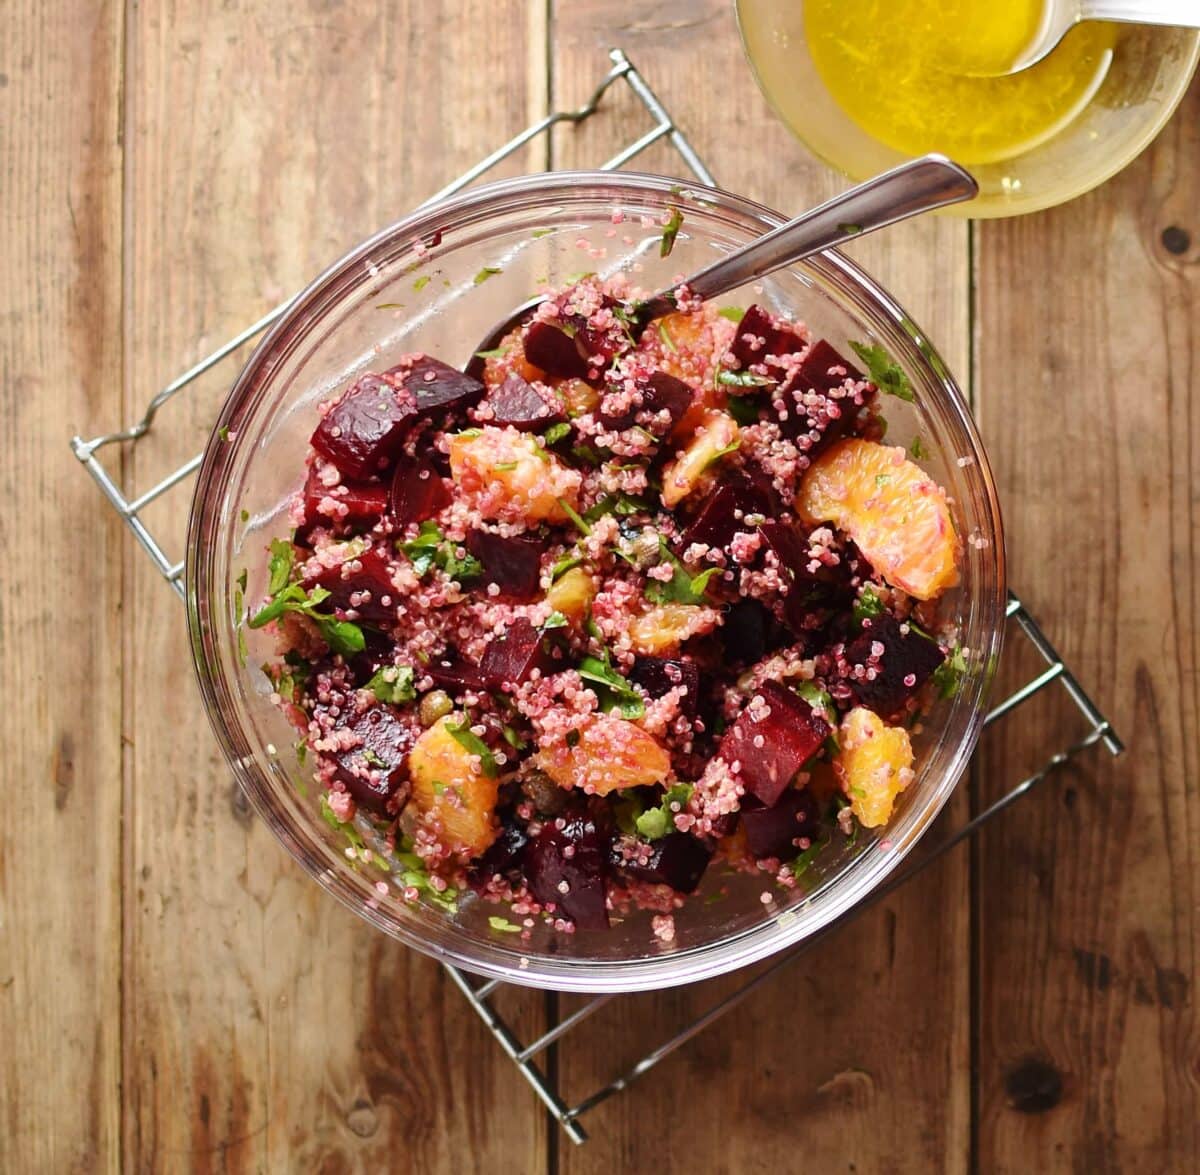 Beets, quinoa and orange salad with spoon inside translucent bowl with salad dressing in small dish in top right corner.